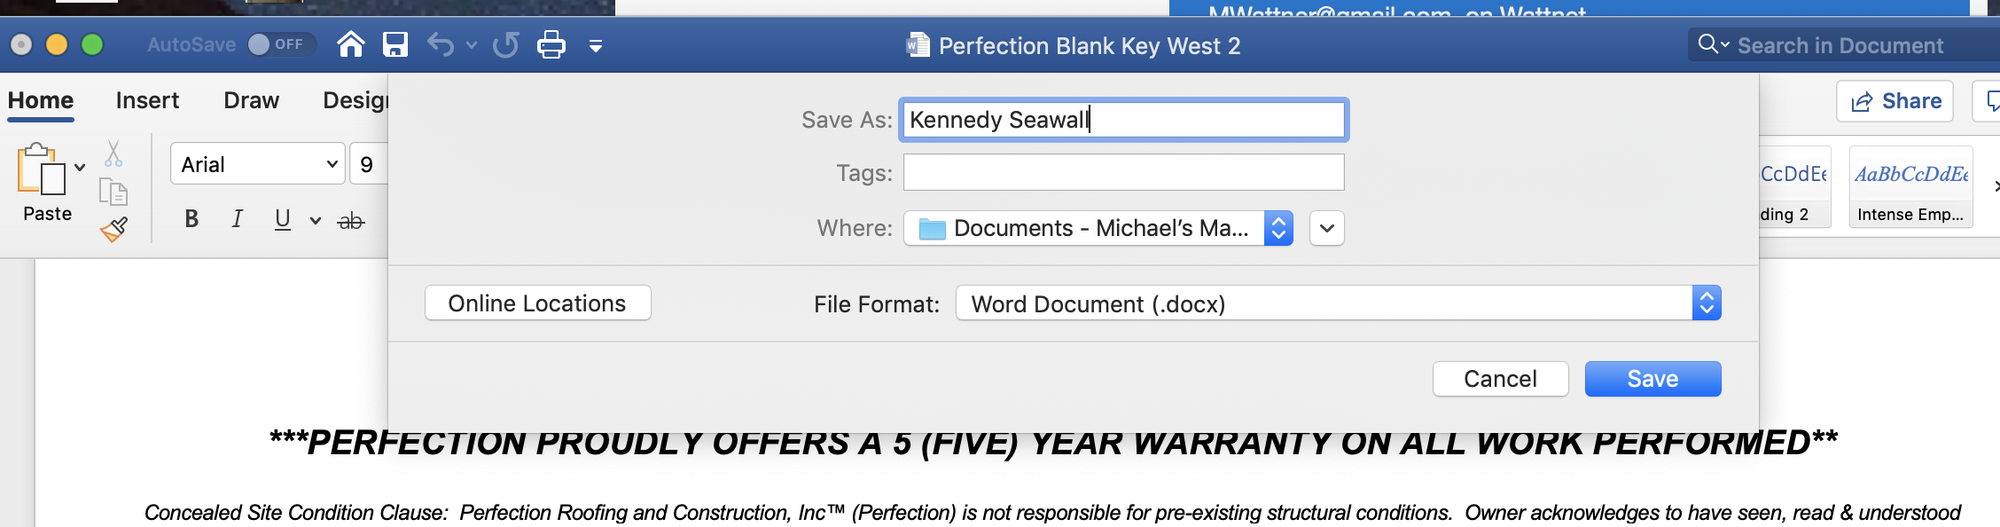 Save Word doc on Windows for Mac 9ca0ea14-4a18-45fd-9930-726167a77958?upload=true.png